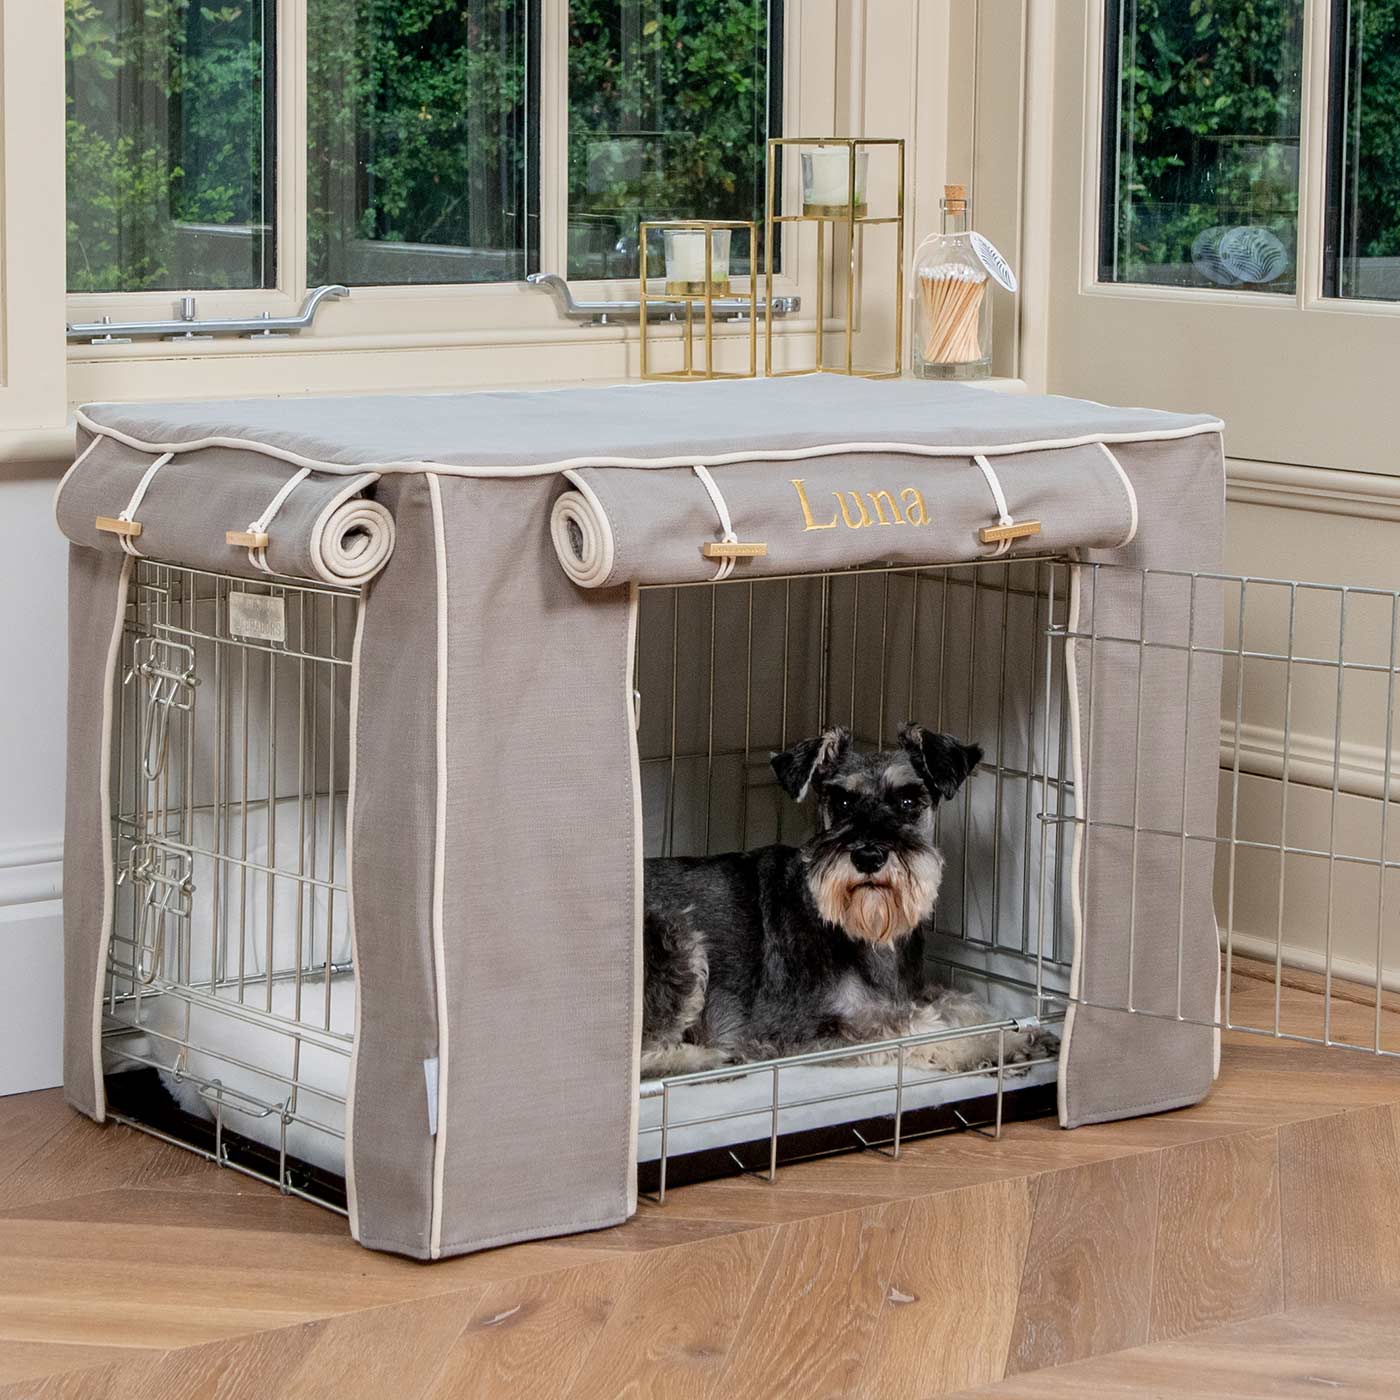 Luxury Dog Crate Cover, Savanna Stone Crate Cover The Perfect Dog Crate Accessory, Available To Personalise Now at Lords & Labradors